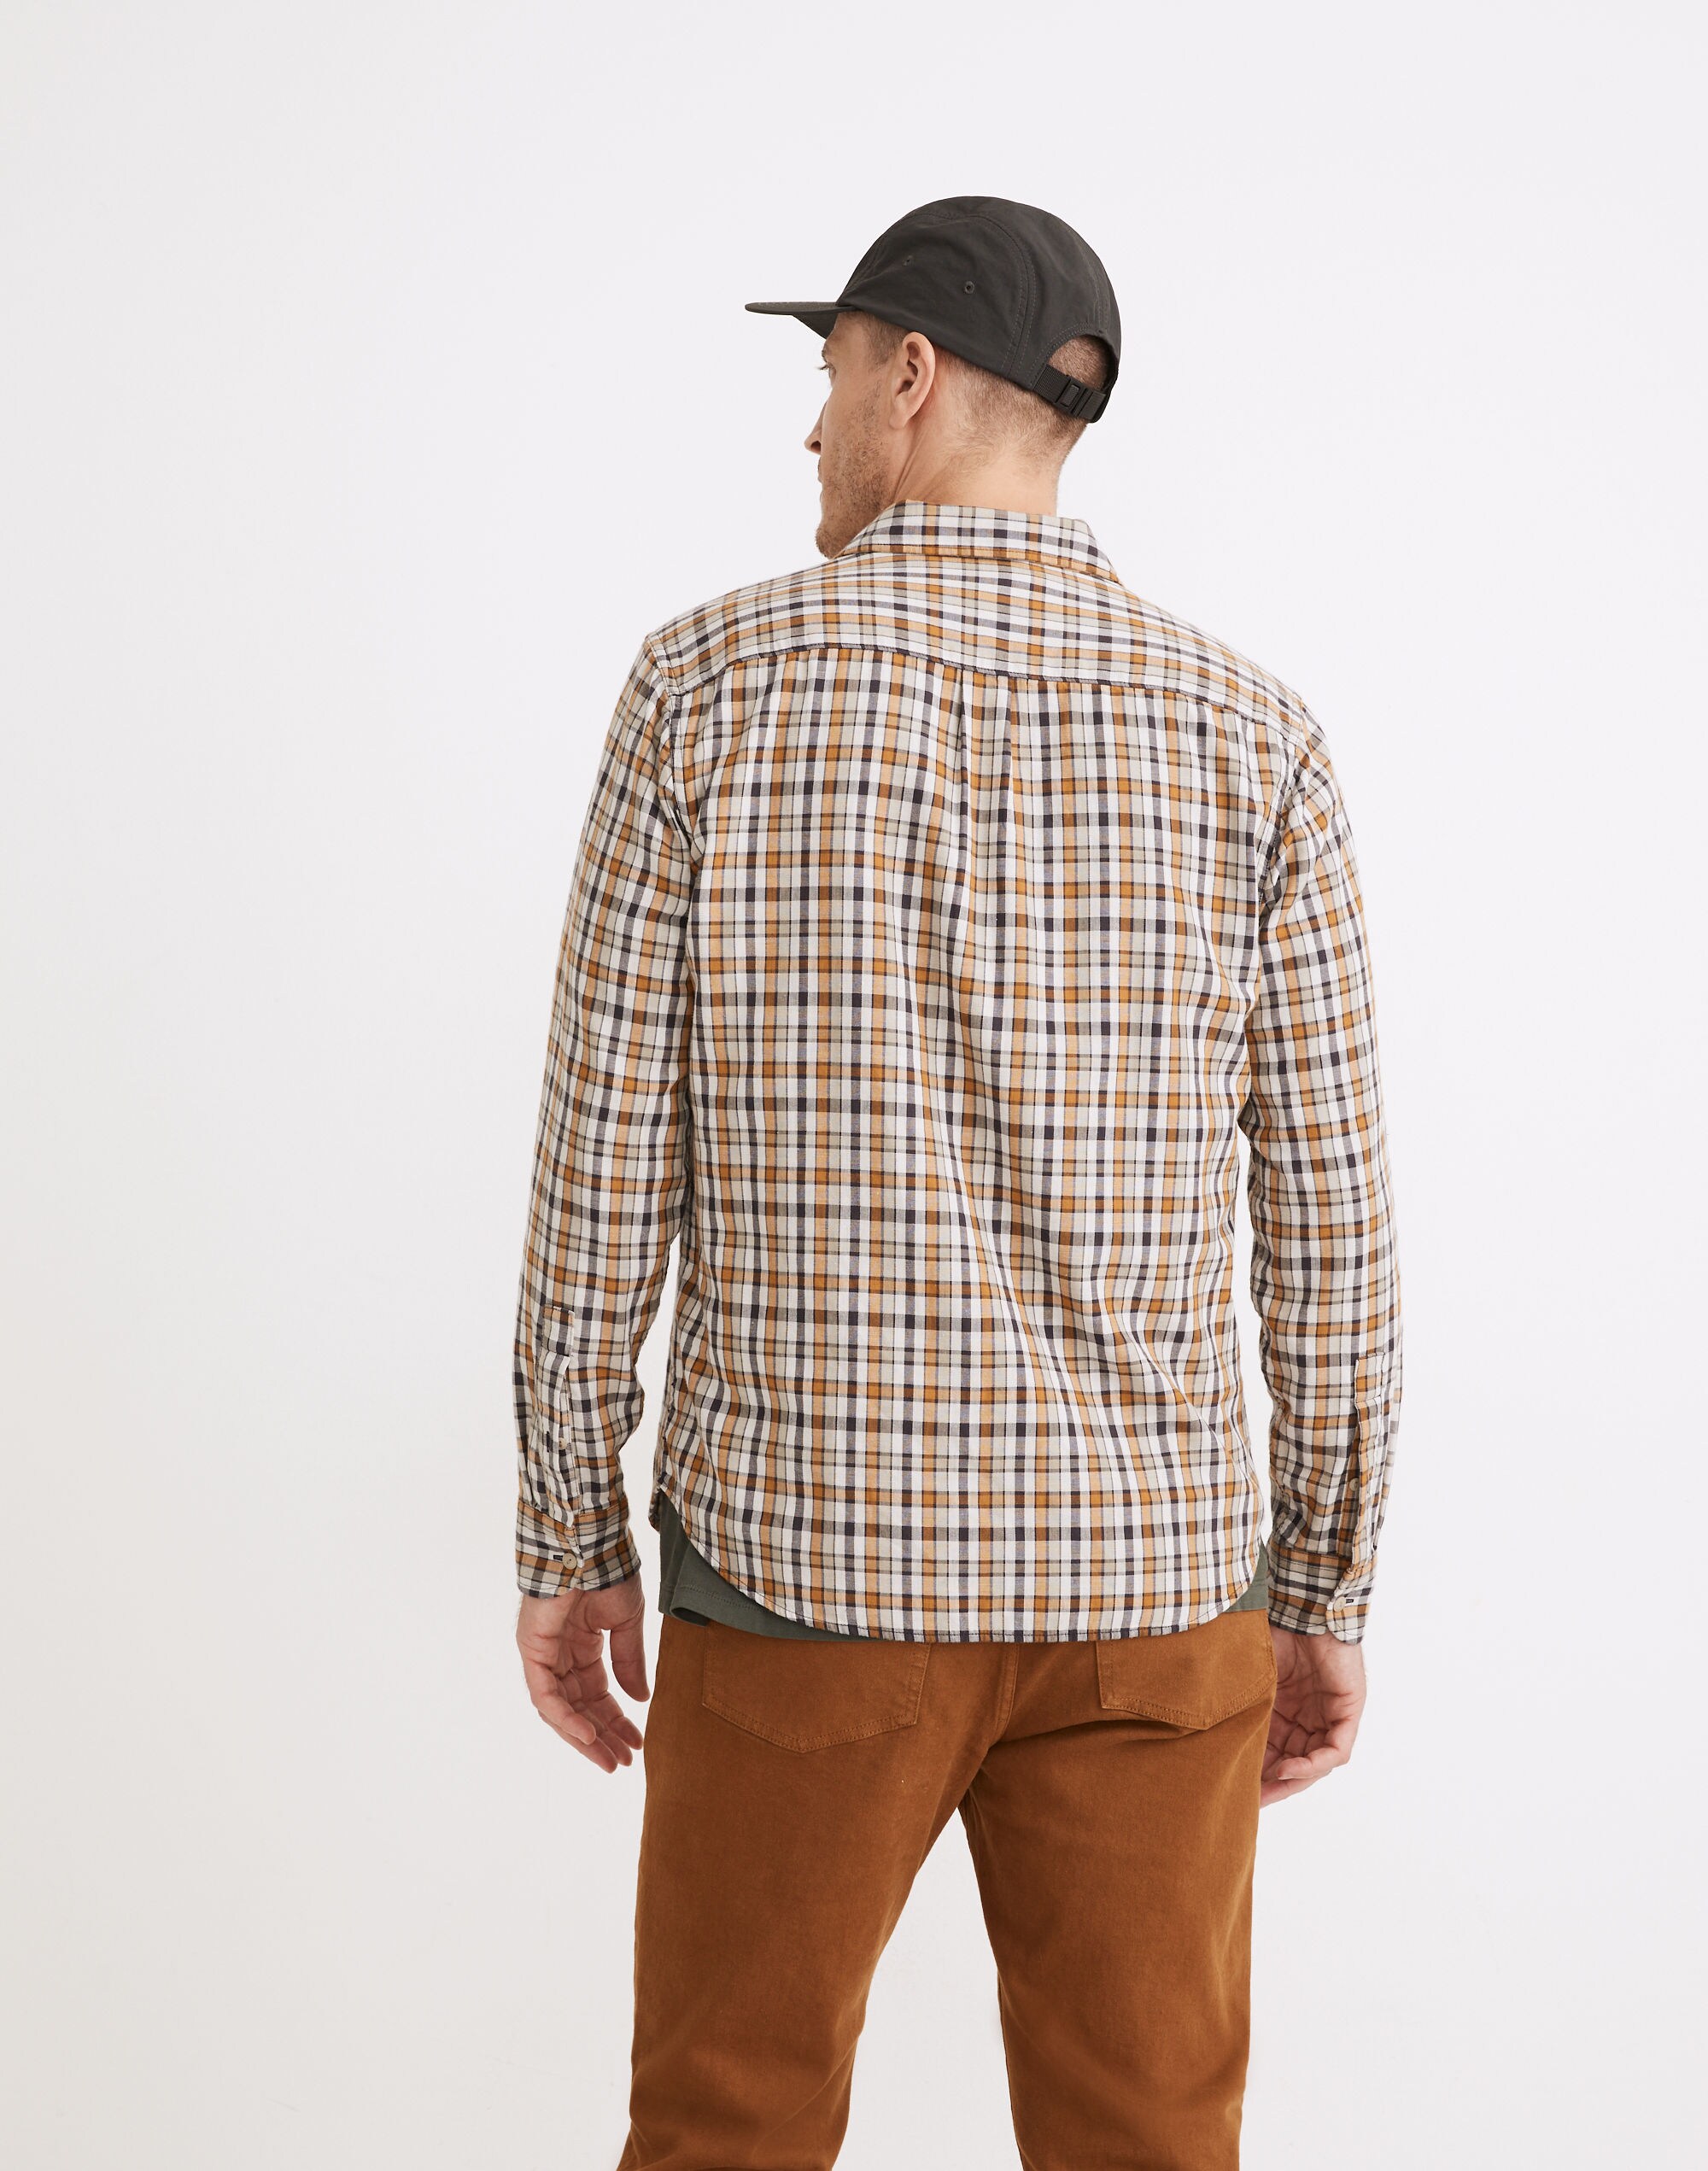 Double-Weave Perfect Long-Sleeve Shirt